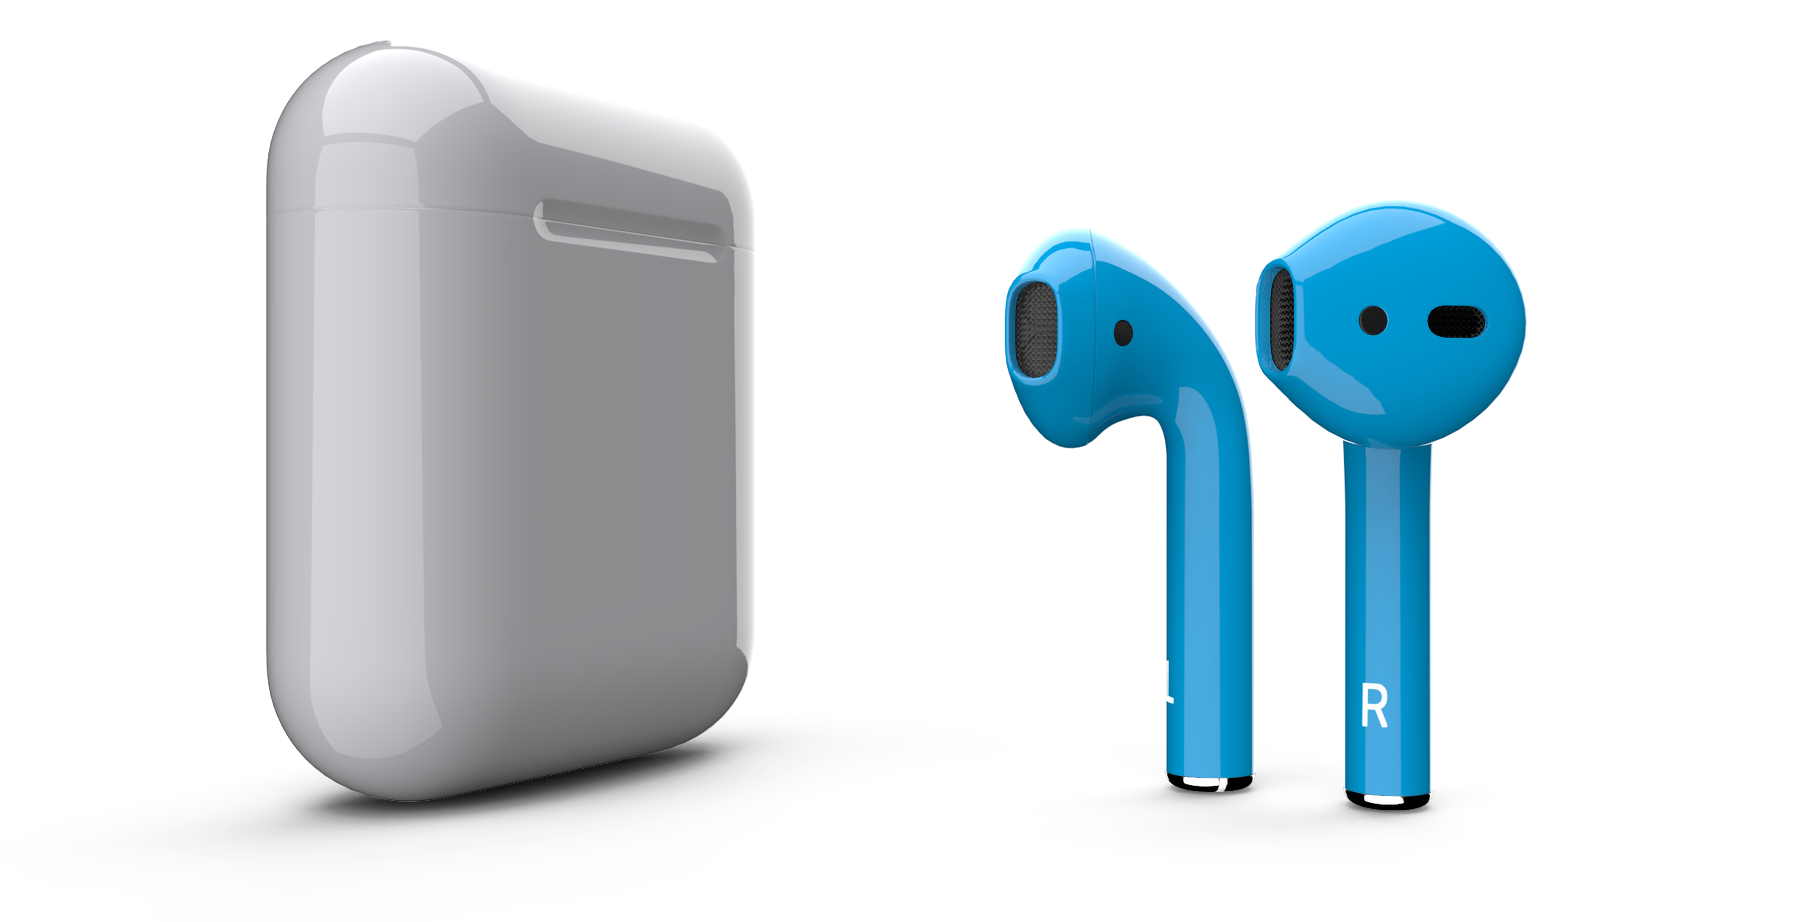 Thanks to Colorware, you can get Apple's AirPods in virtually any color that you want for $299